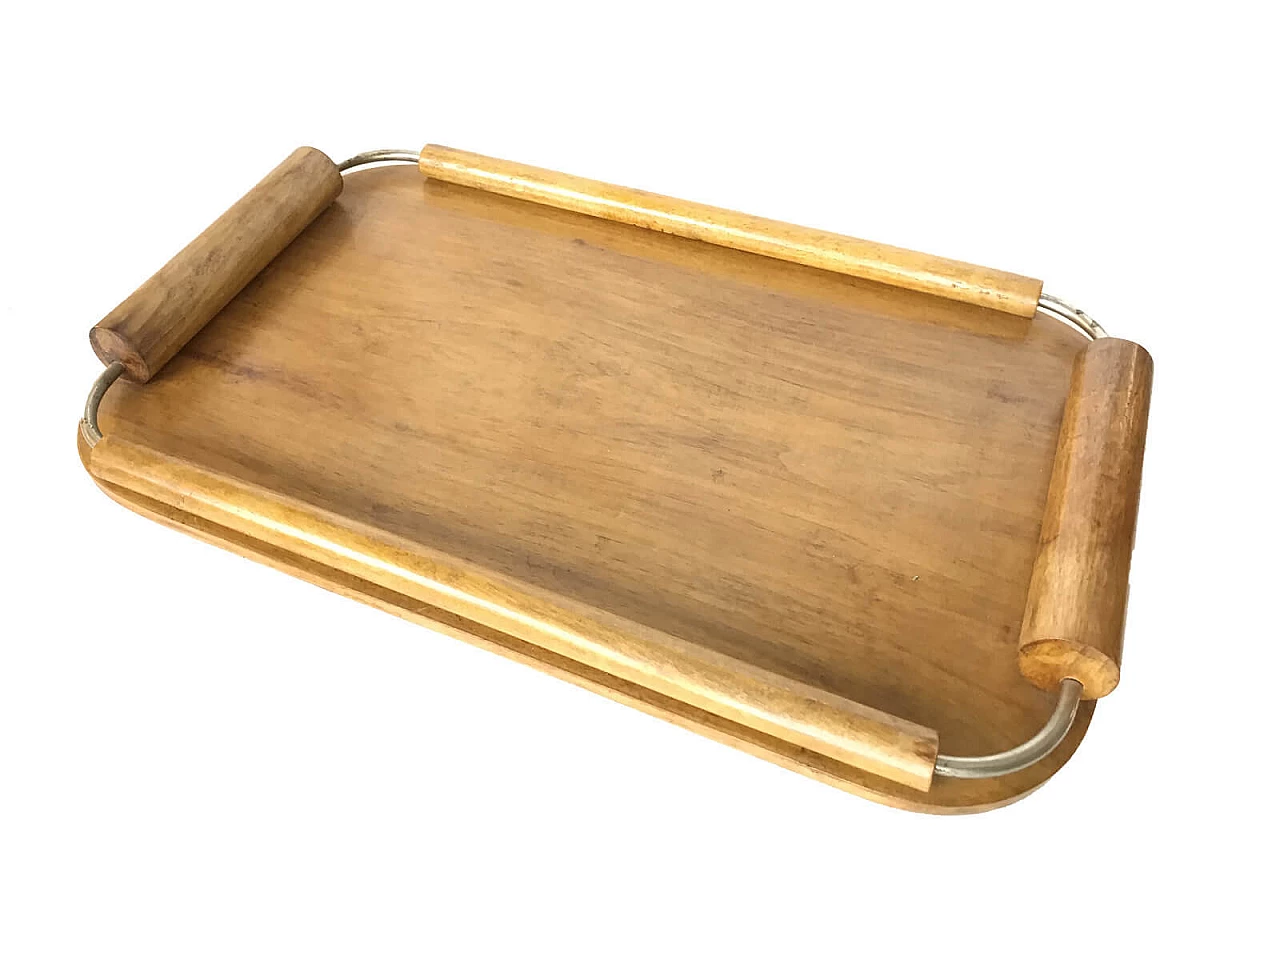 Chamfered wooden tray. Italian manufacture, '30s. 1